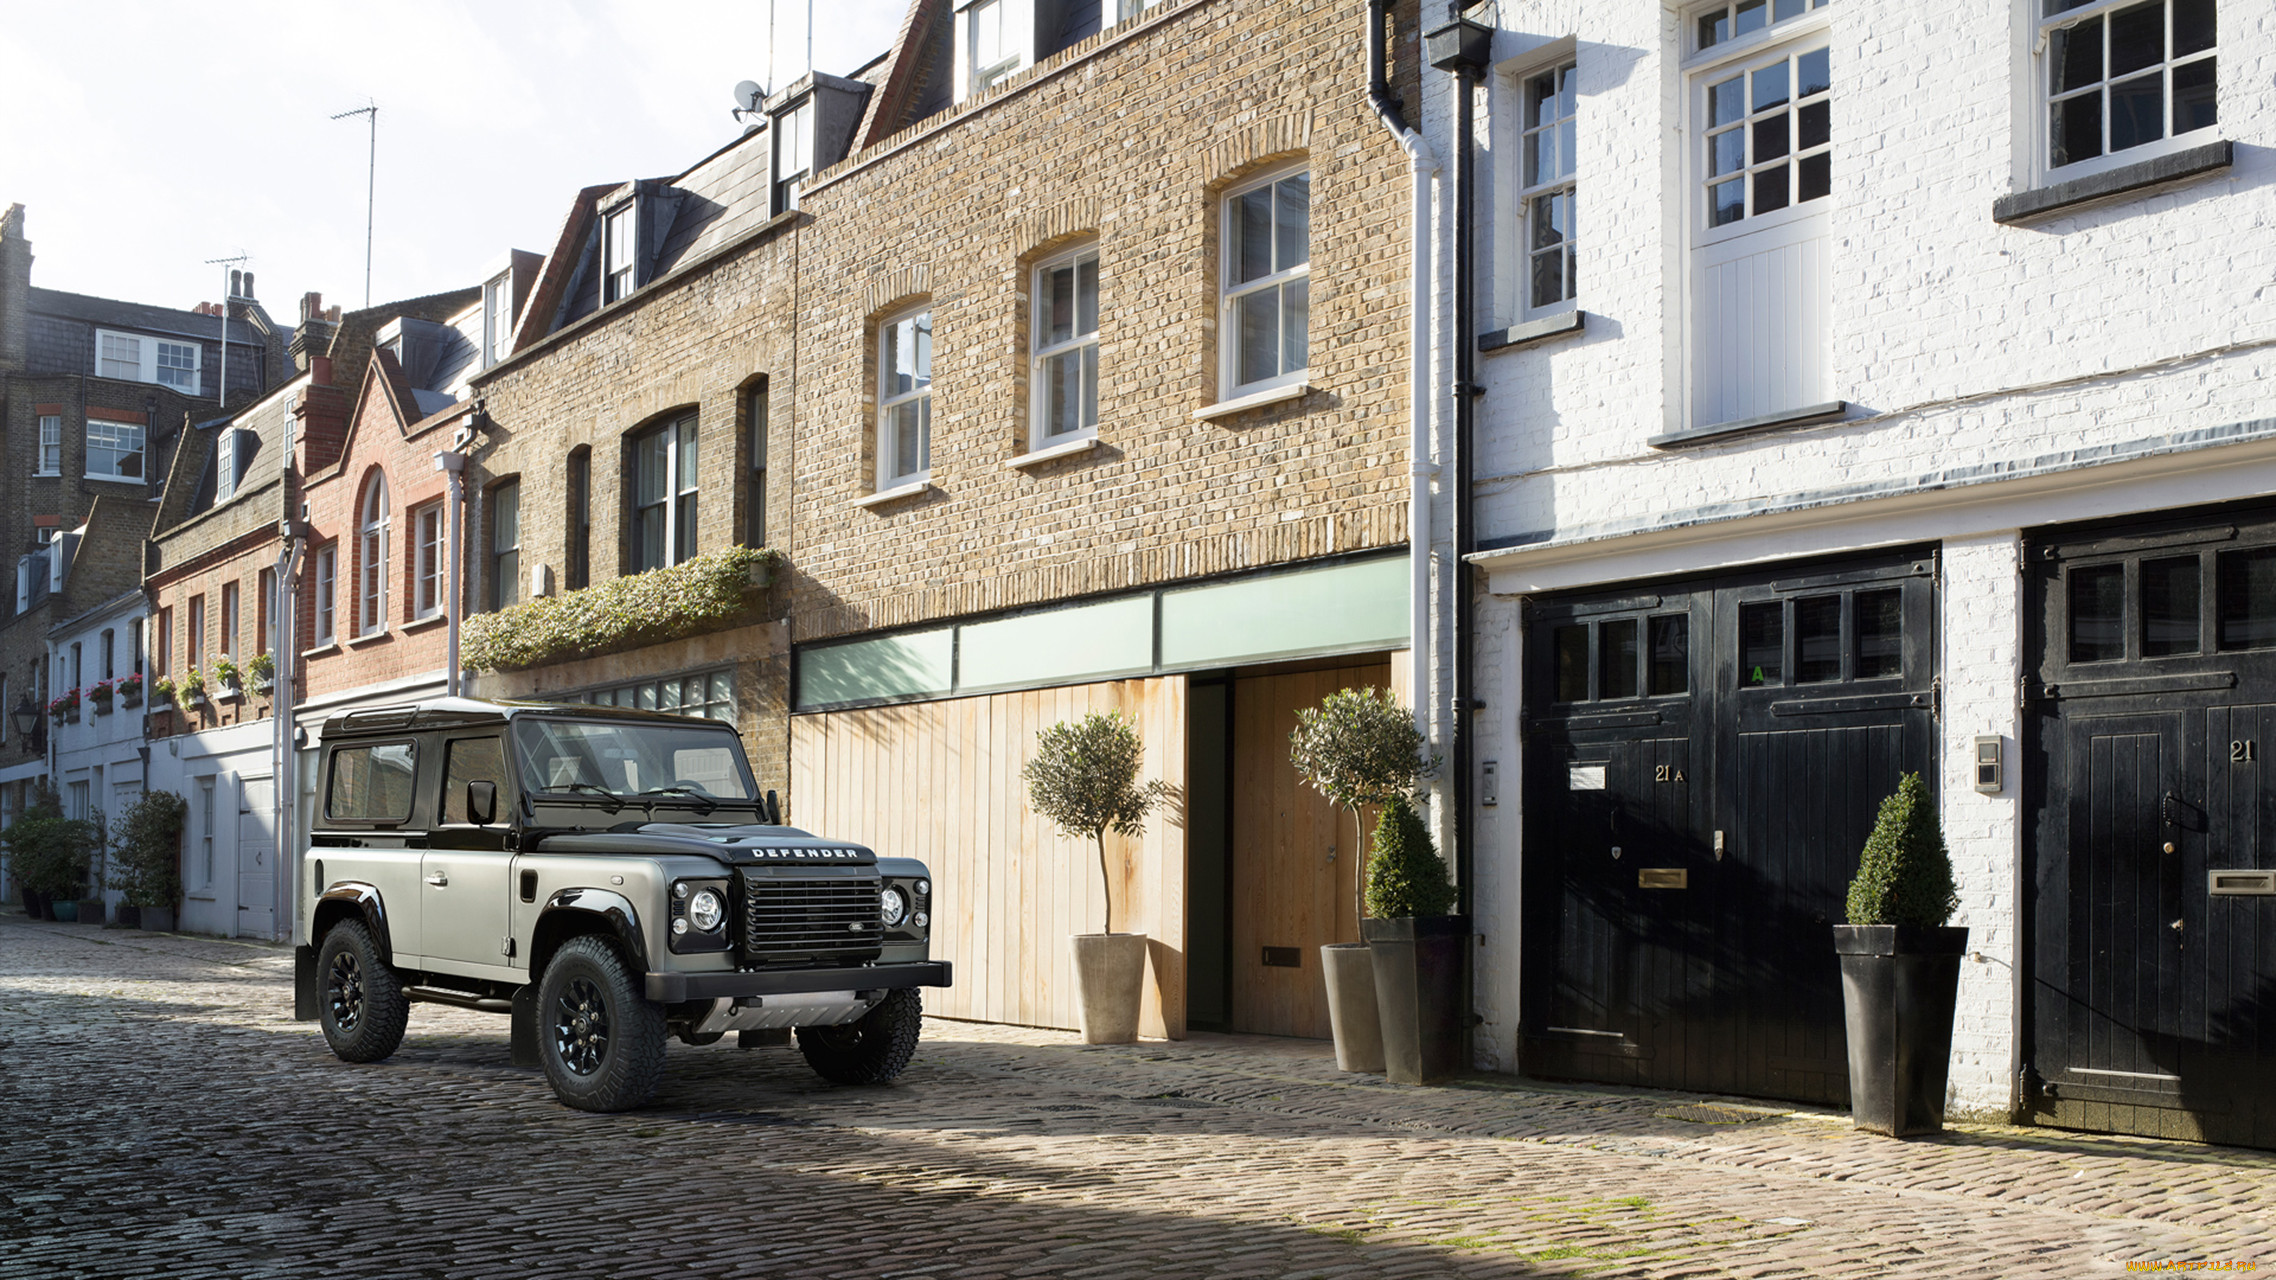 land-rover defender autobiography edition 2015, , land-rover, defender, edition, 2015, autobiography